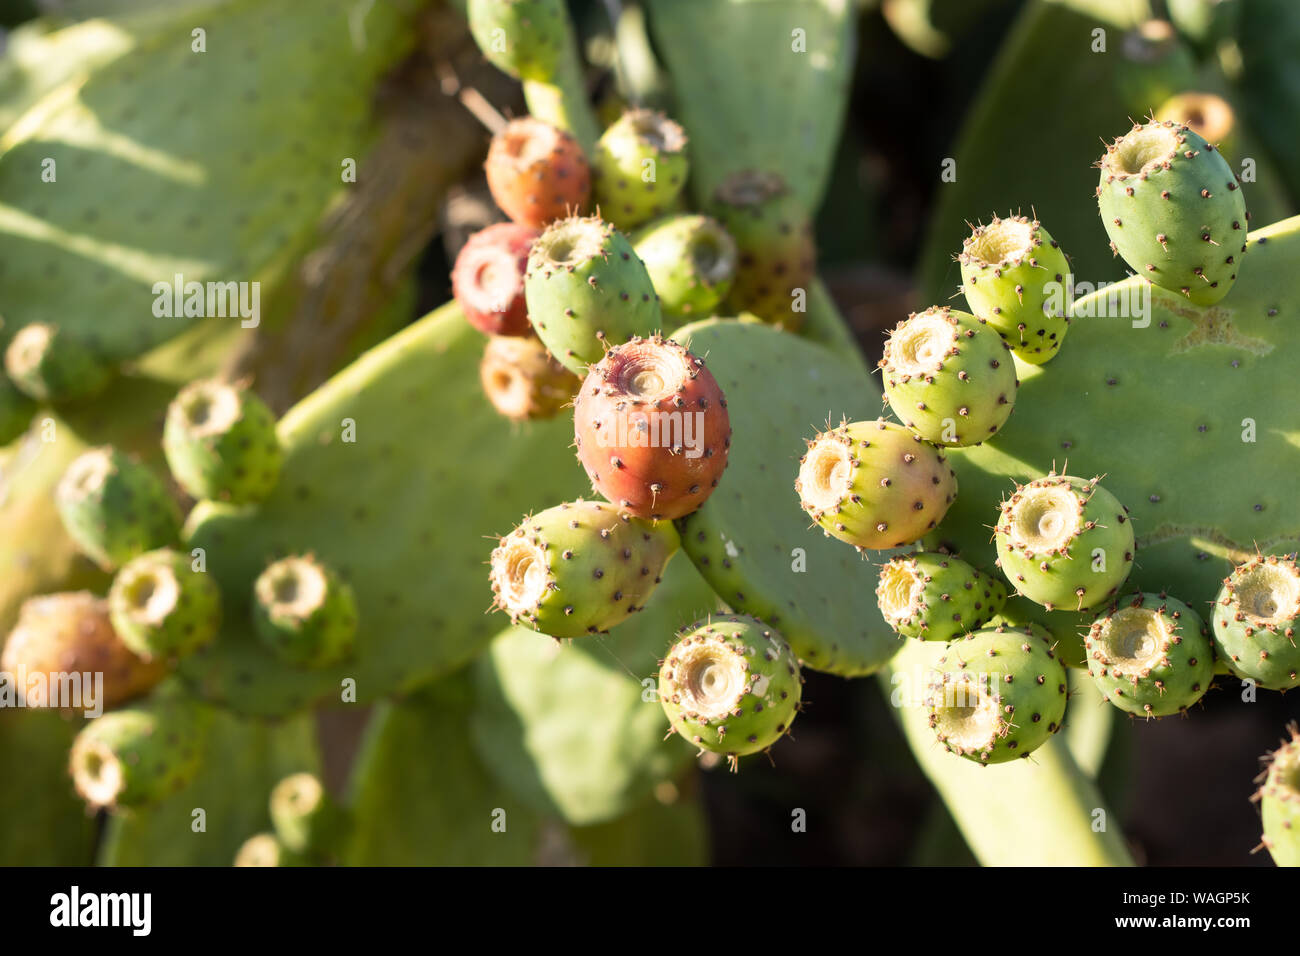 Prickly pear cactus (opuntia) full of fruits in different stages Stock Photo